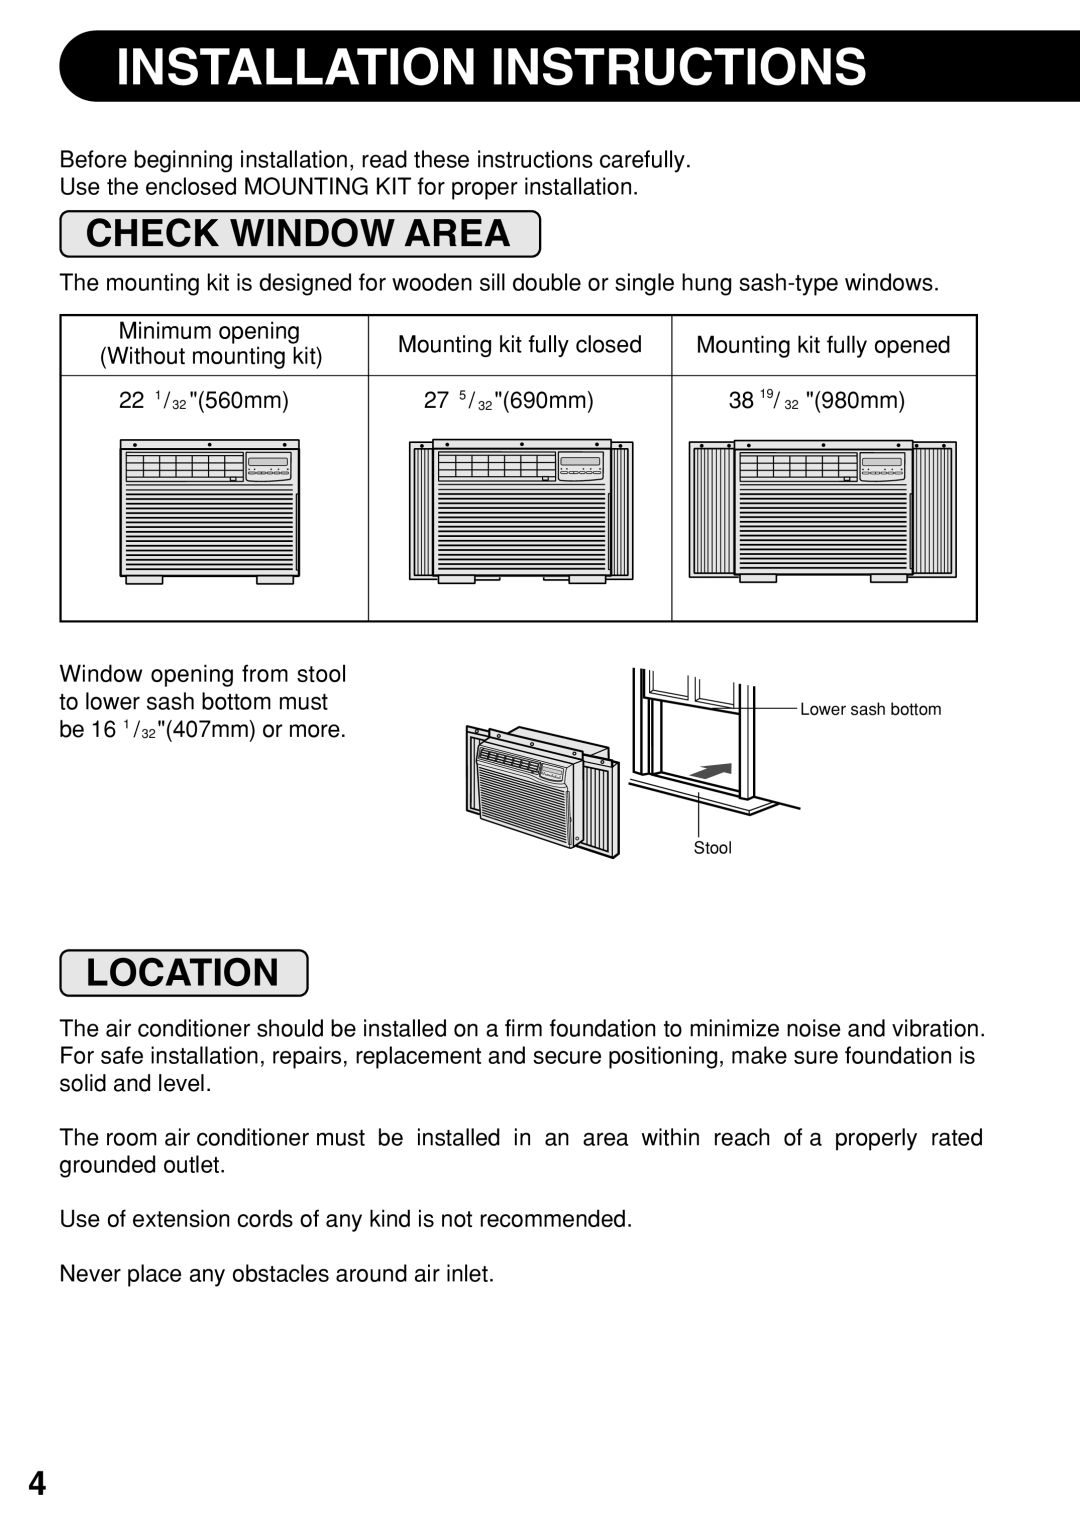 Sharp AF-R140DX, AF-S100DX, AF-S120DX, AF-R120DX, AF-100DX Installation Instructions, Check Window Area, Location 